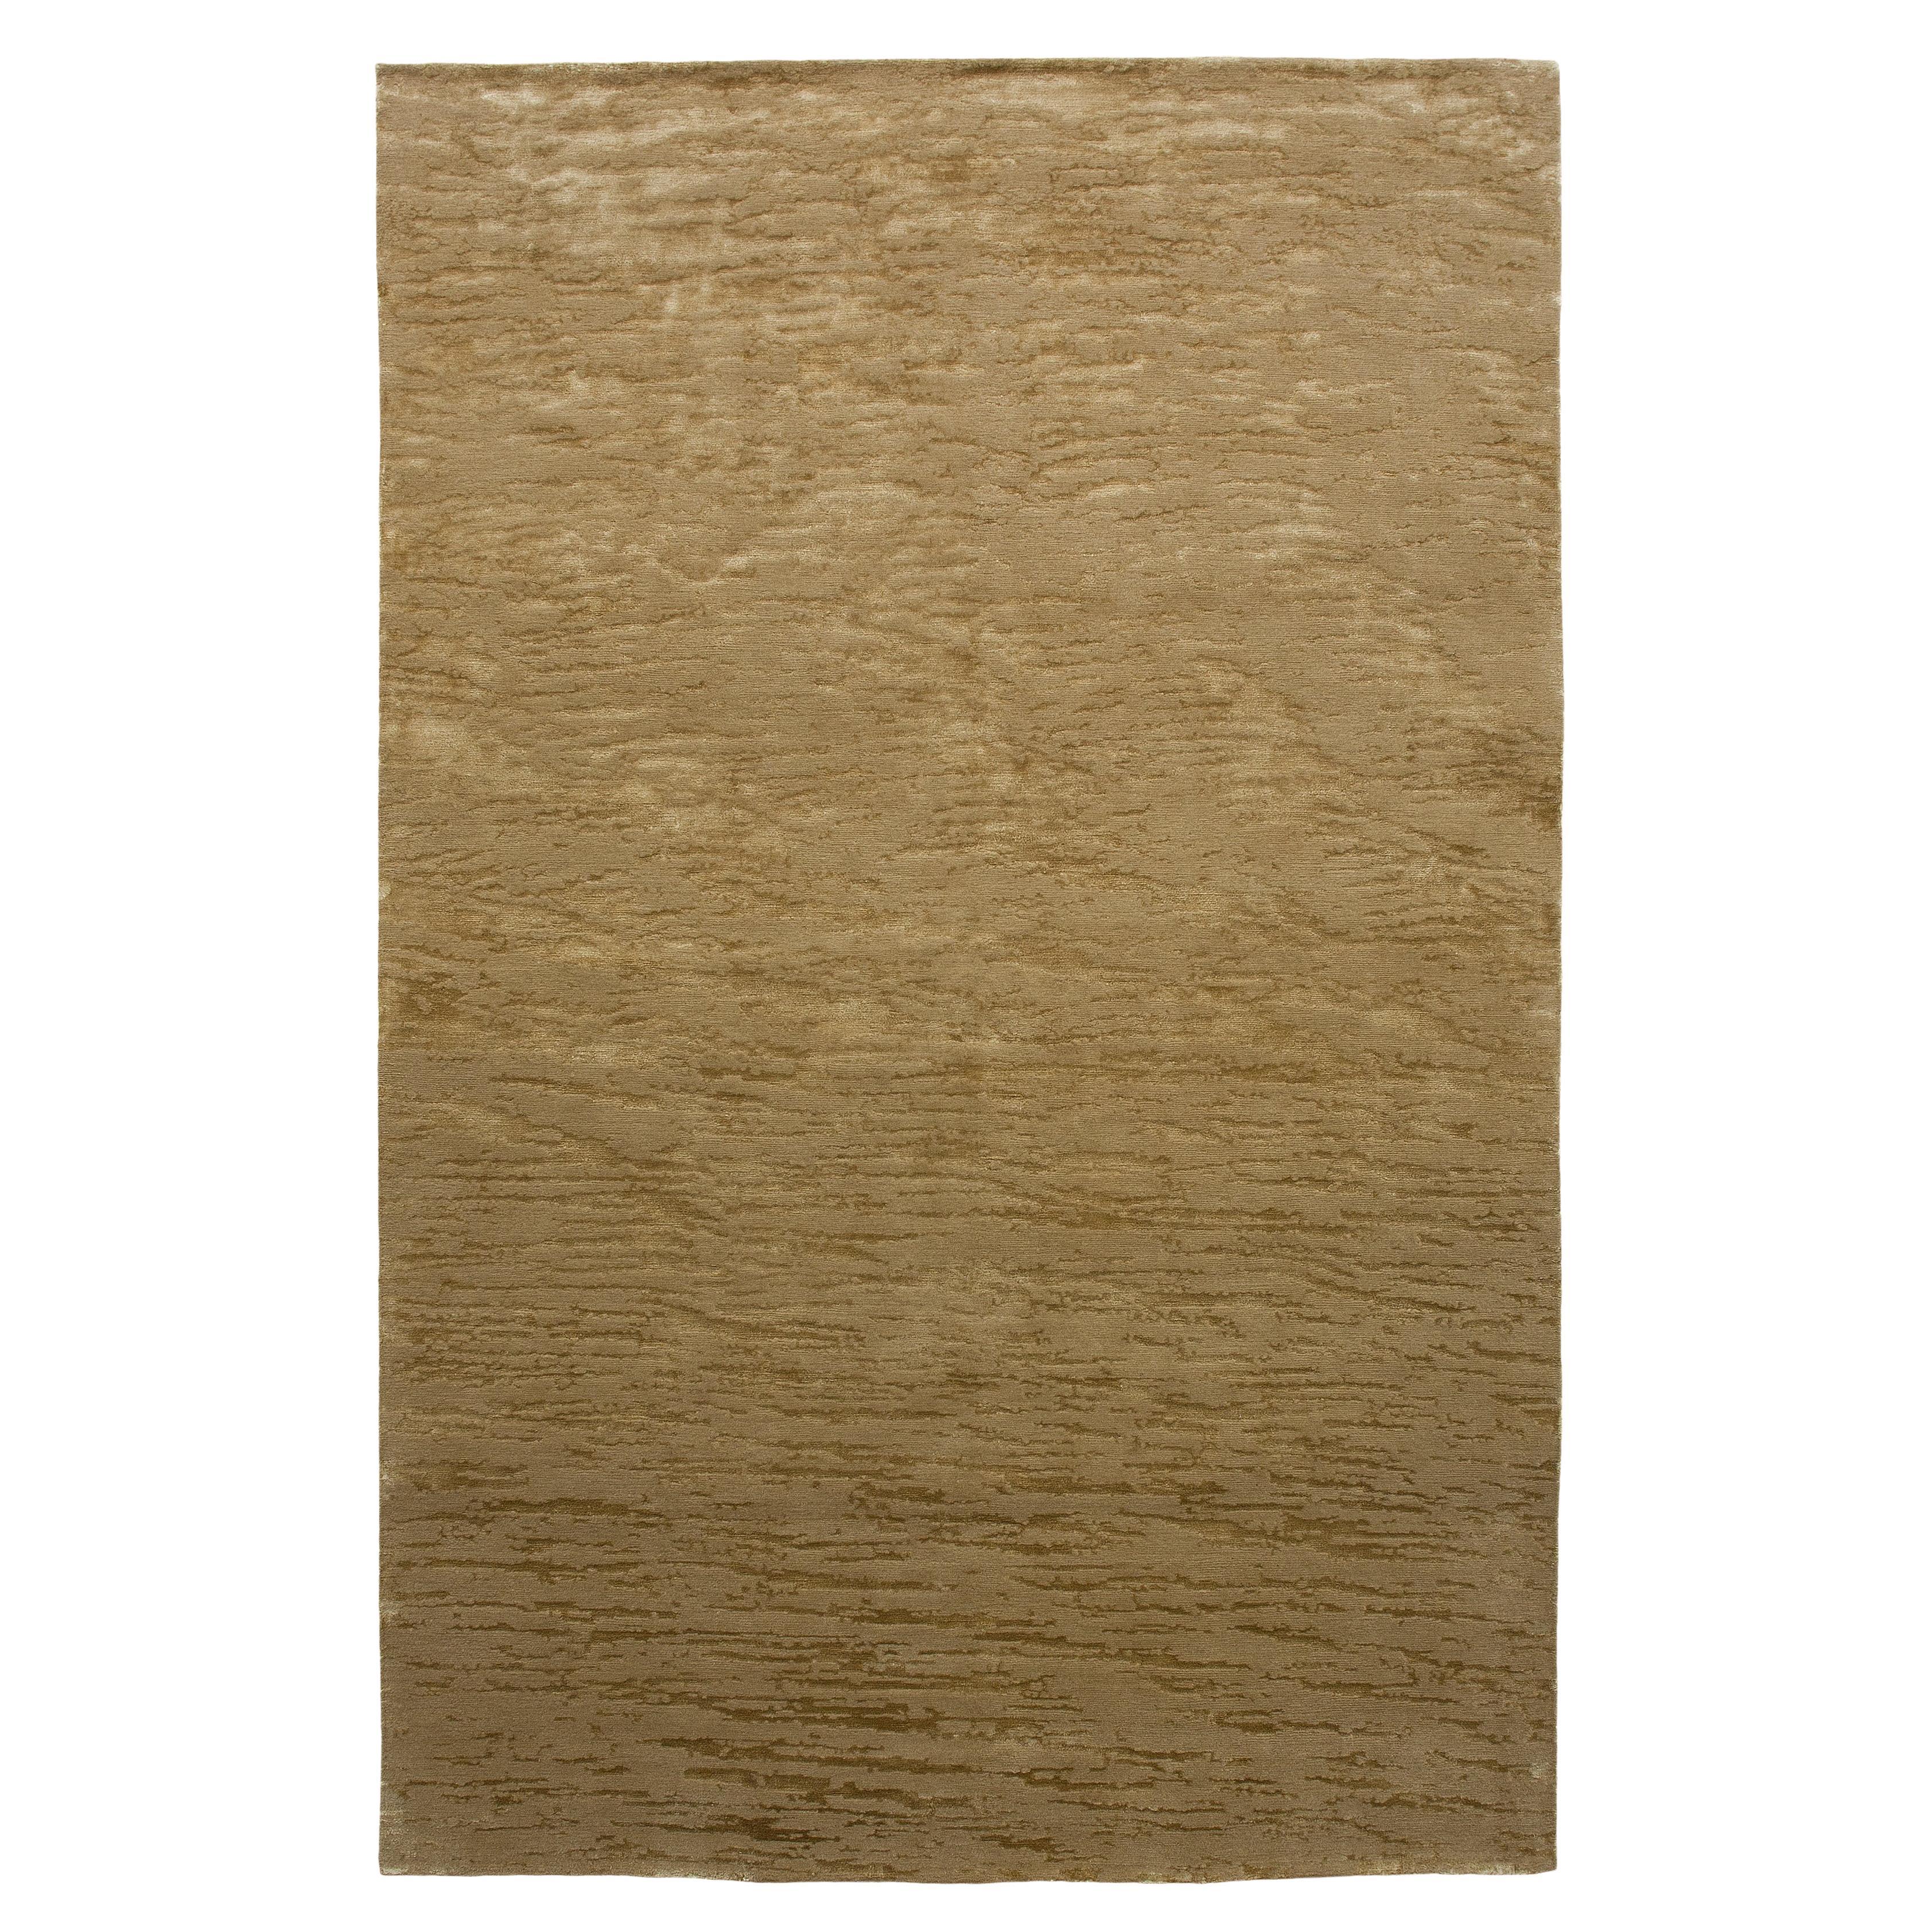 Luxury Modern Hand-Knotted Adaptations Blurr Gold 10x14 Rug